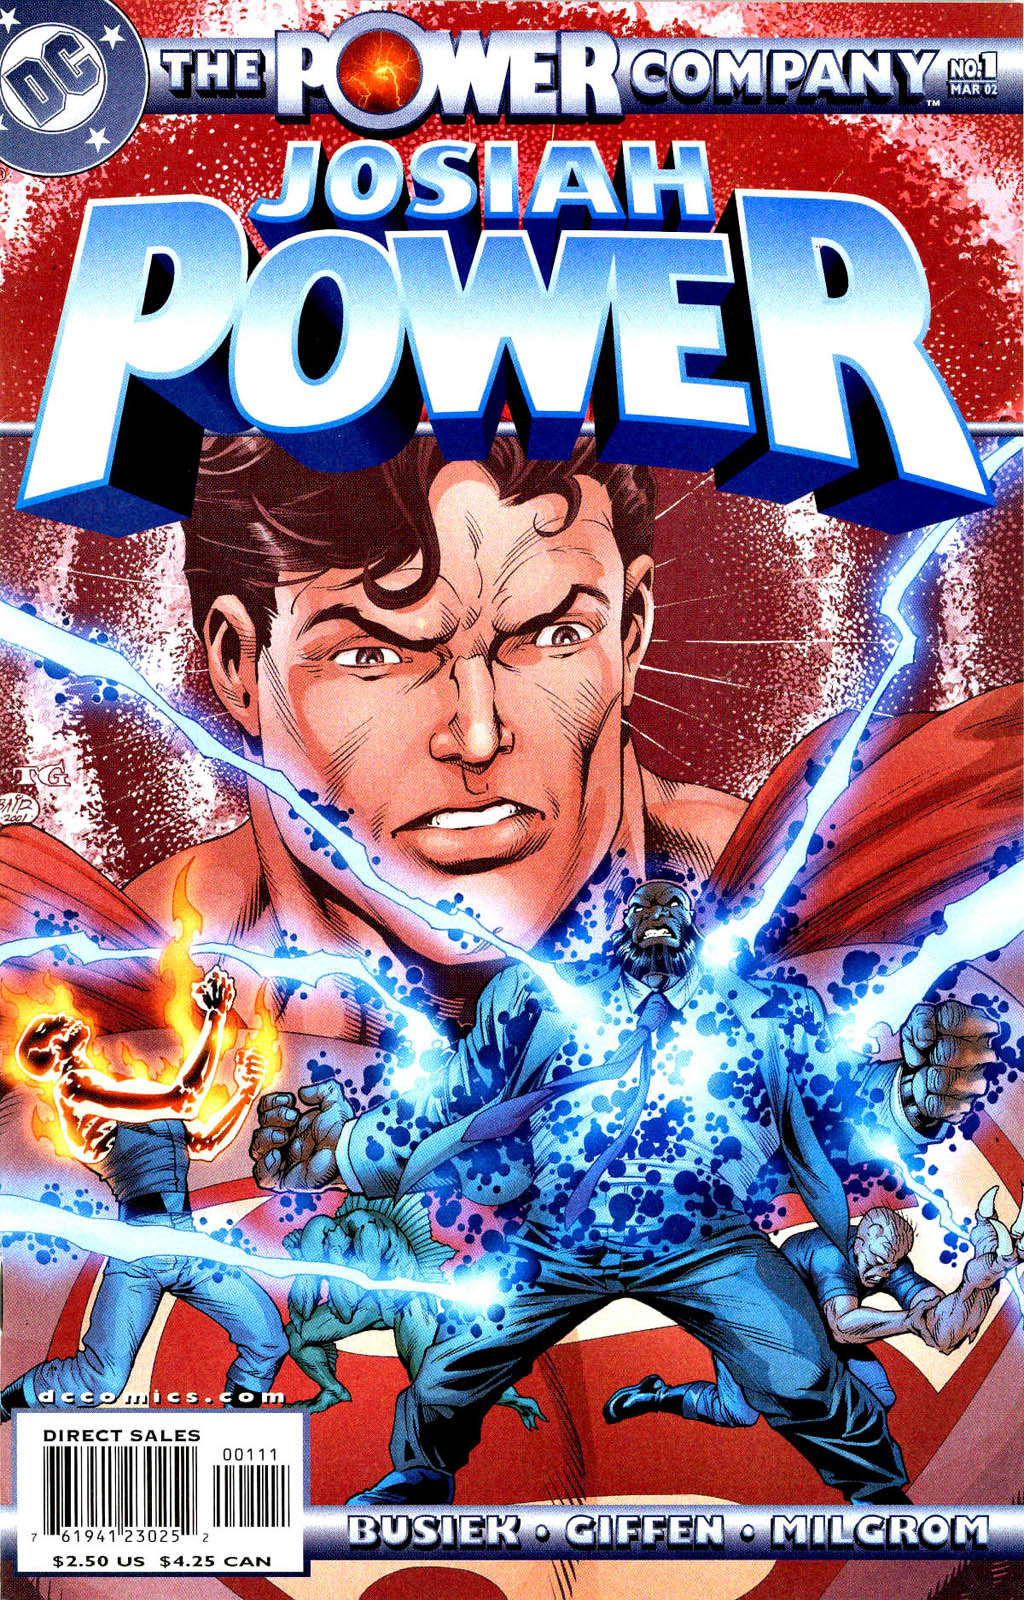 Read online The Power Company: Josiah Power comic -  Issue # Full - 1